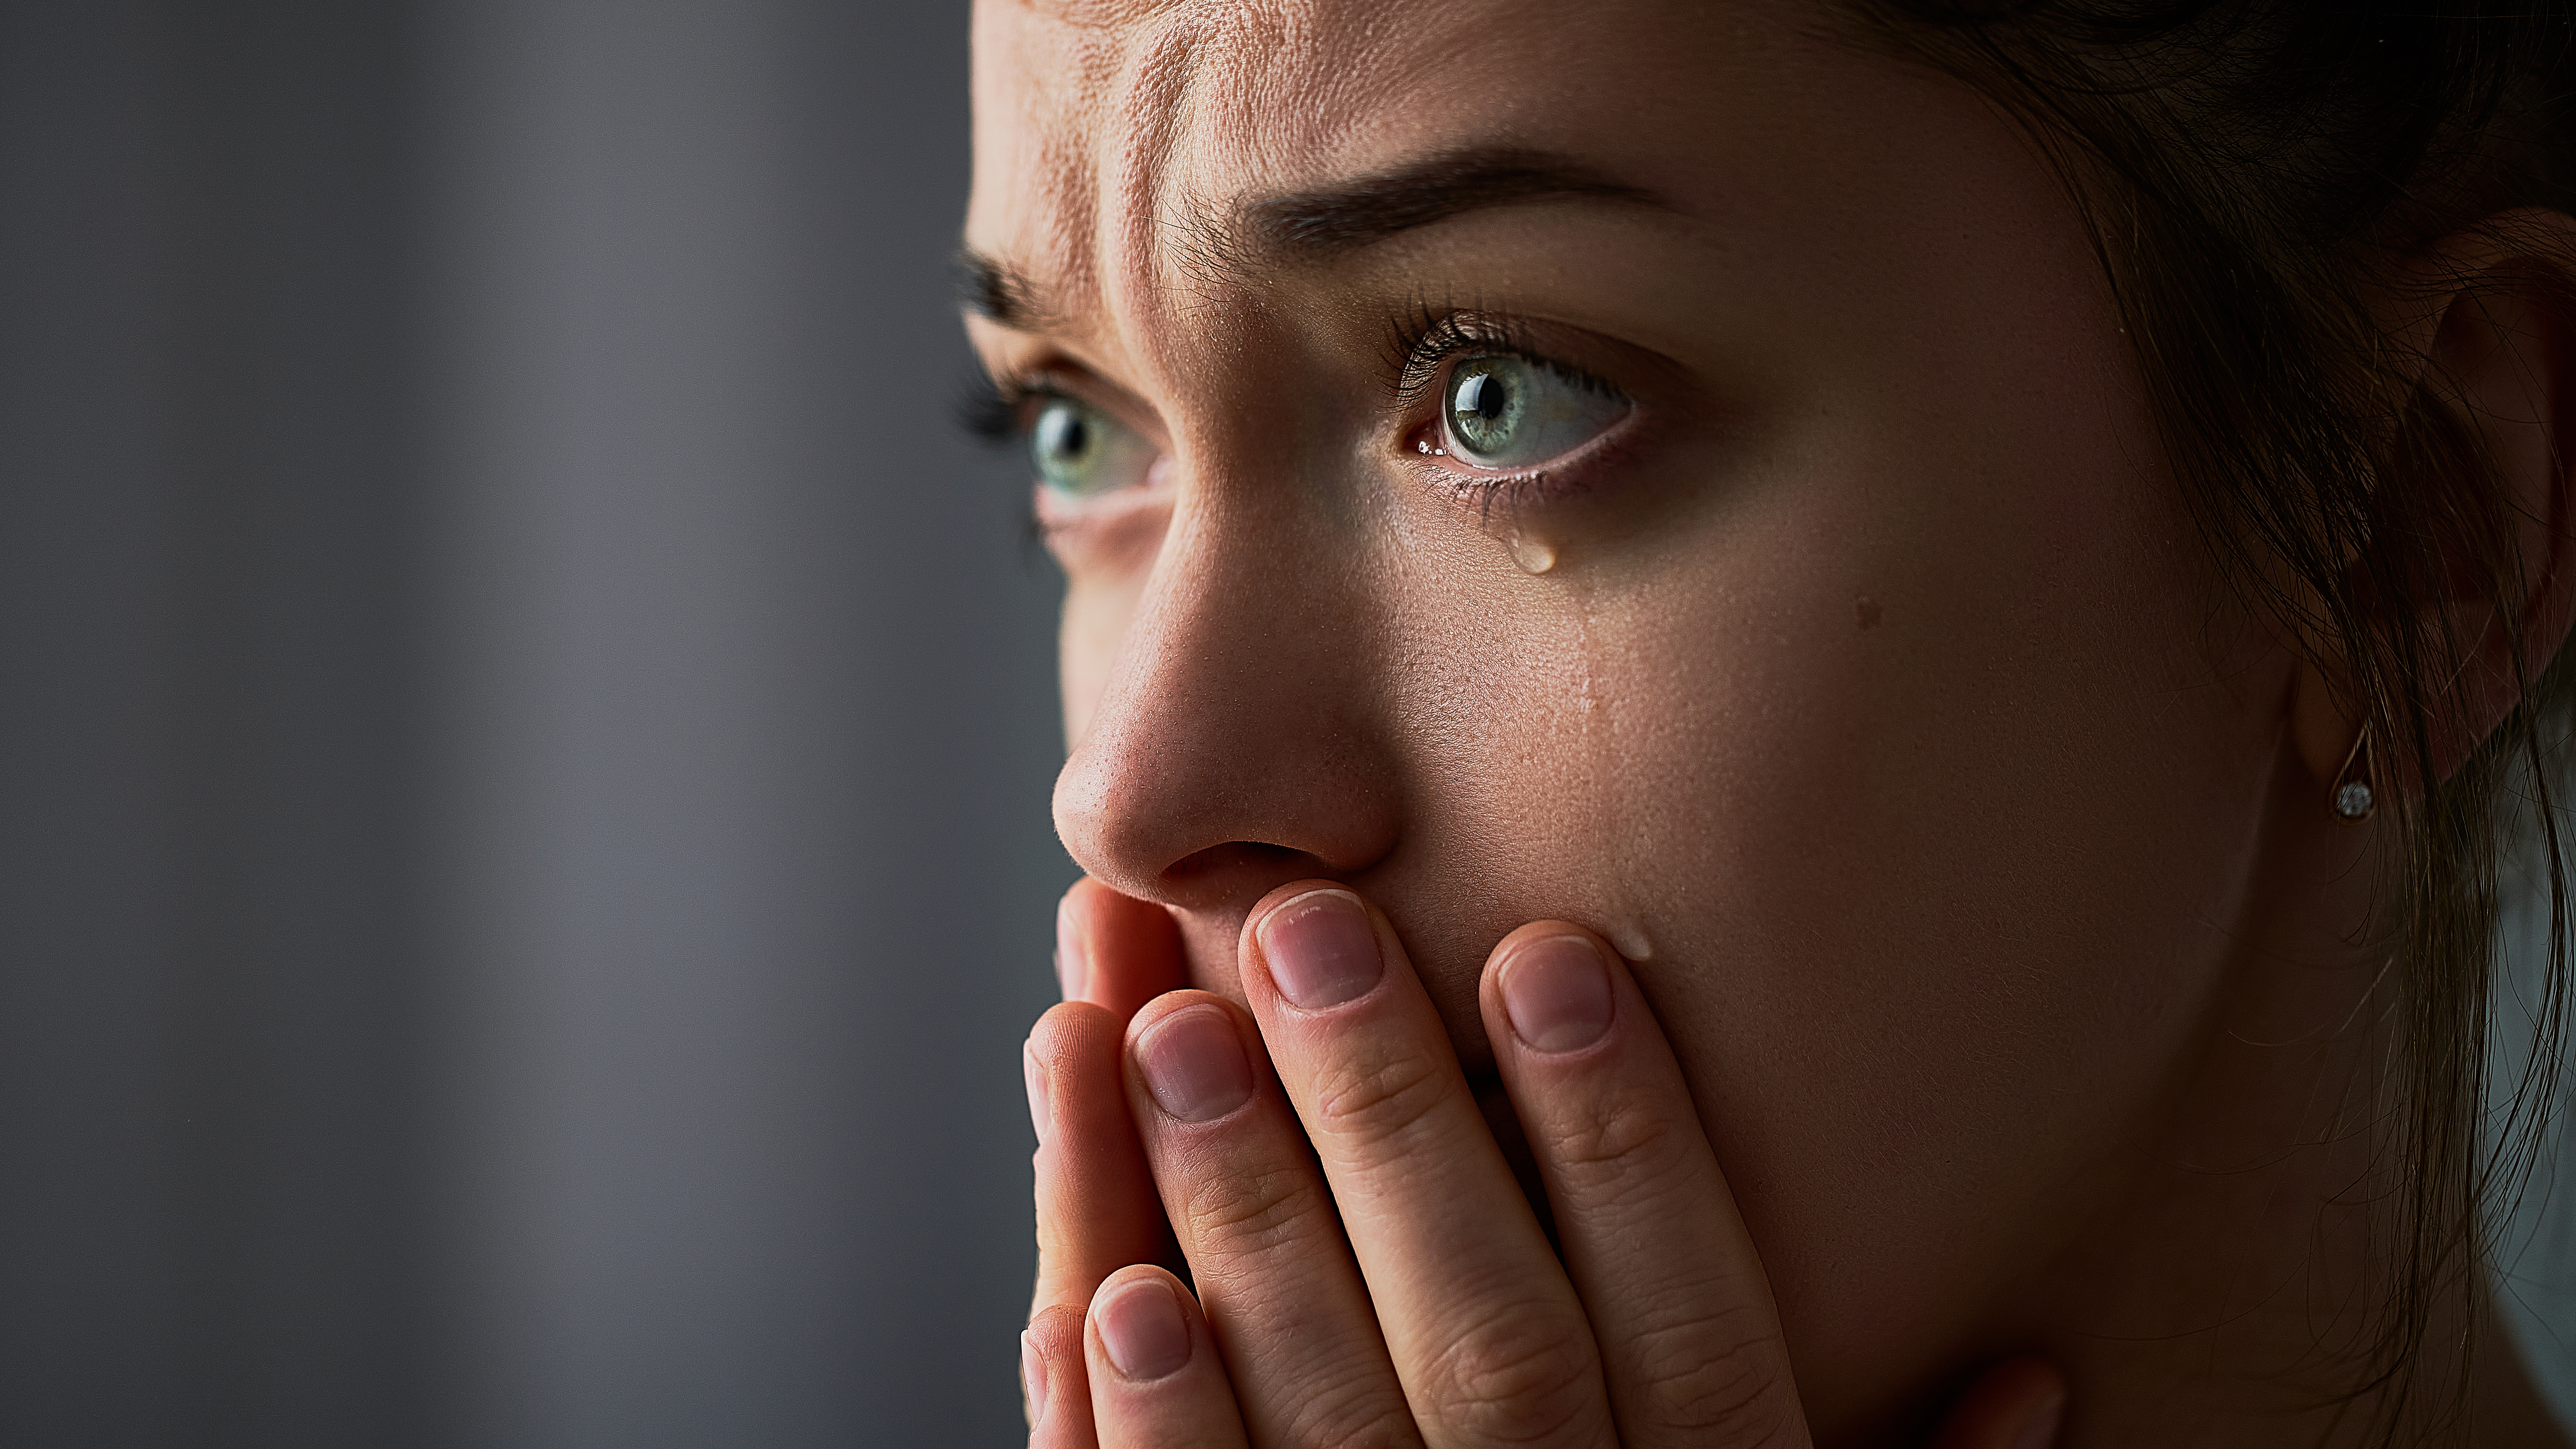 Sad desperate grieving crying woman | Source: Shutterstock